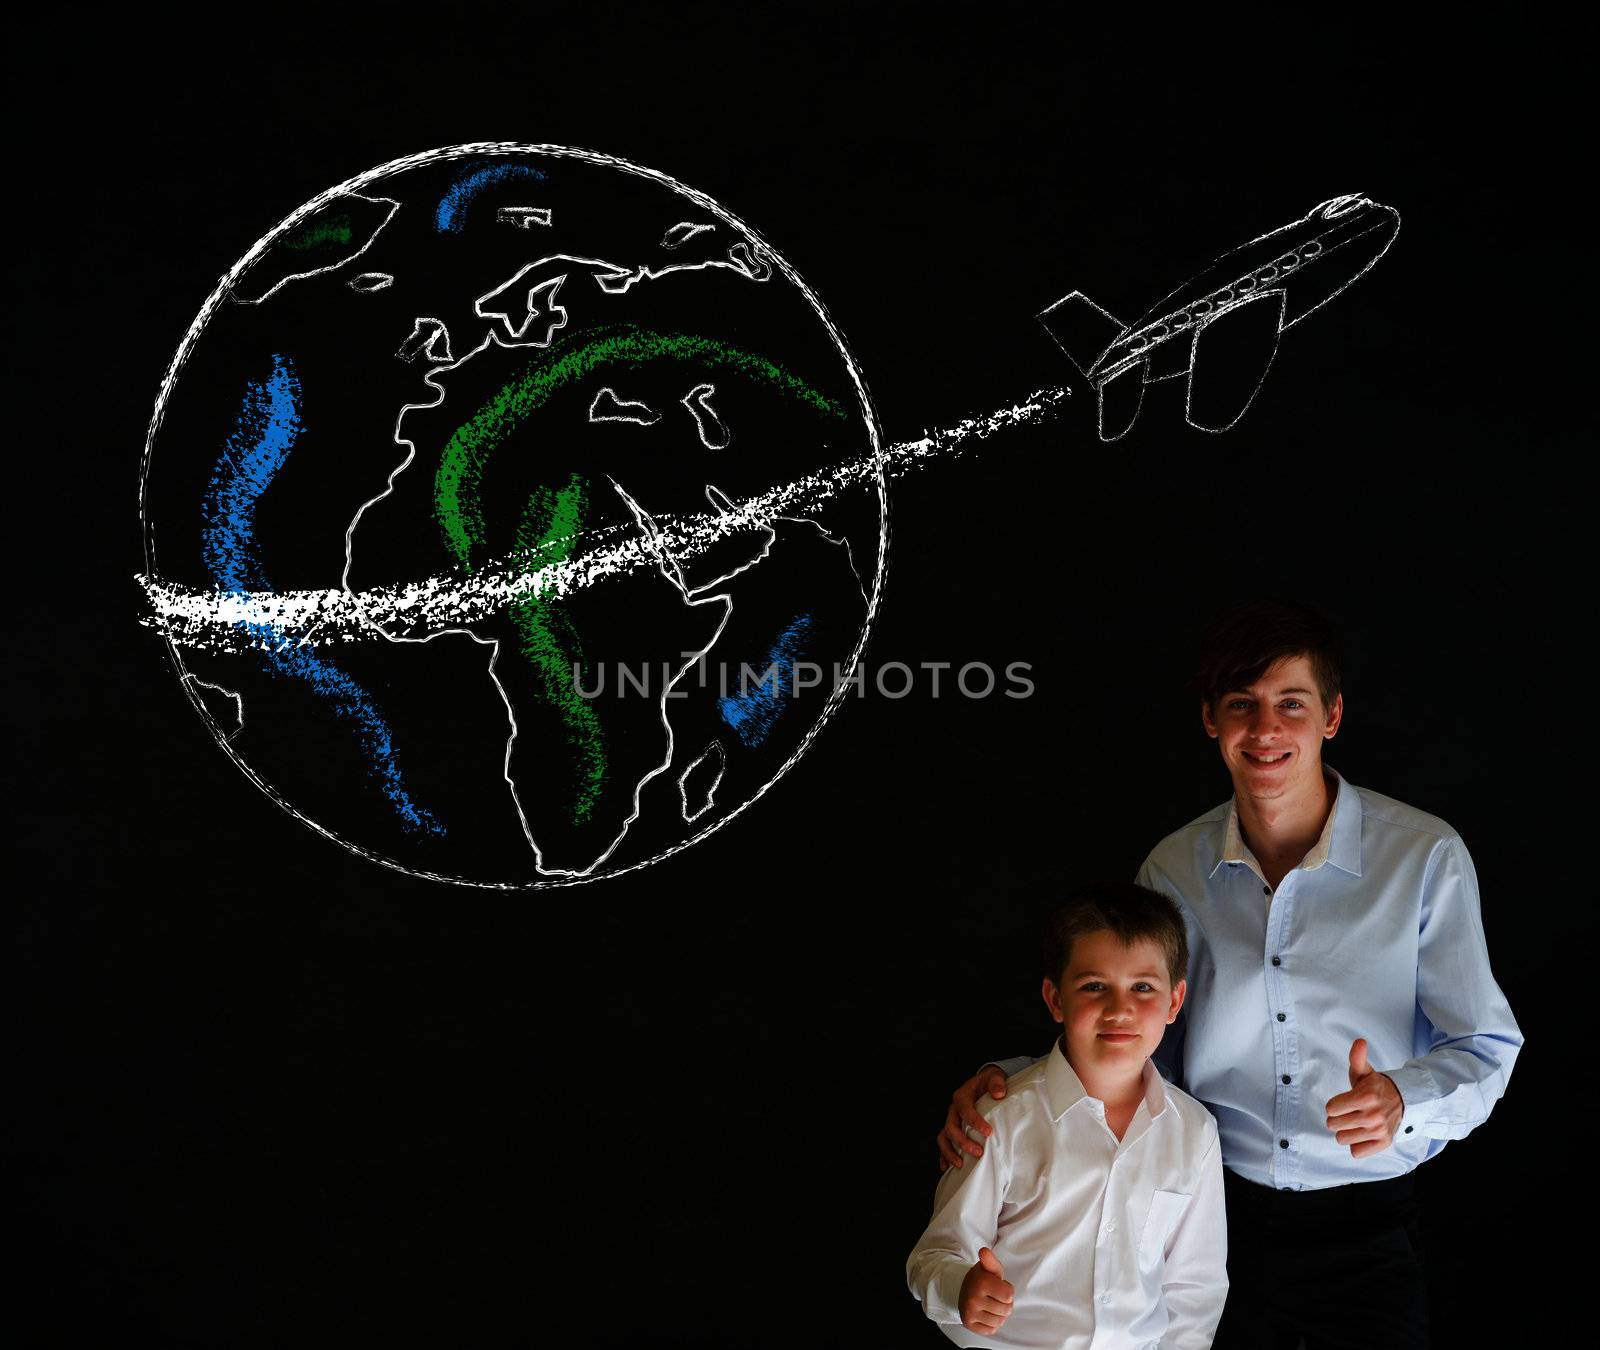 Thumbs up boy dressed up as business man with teacher man and chalk globe and jet world travel on blackboard background